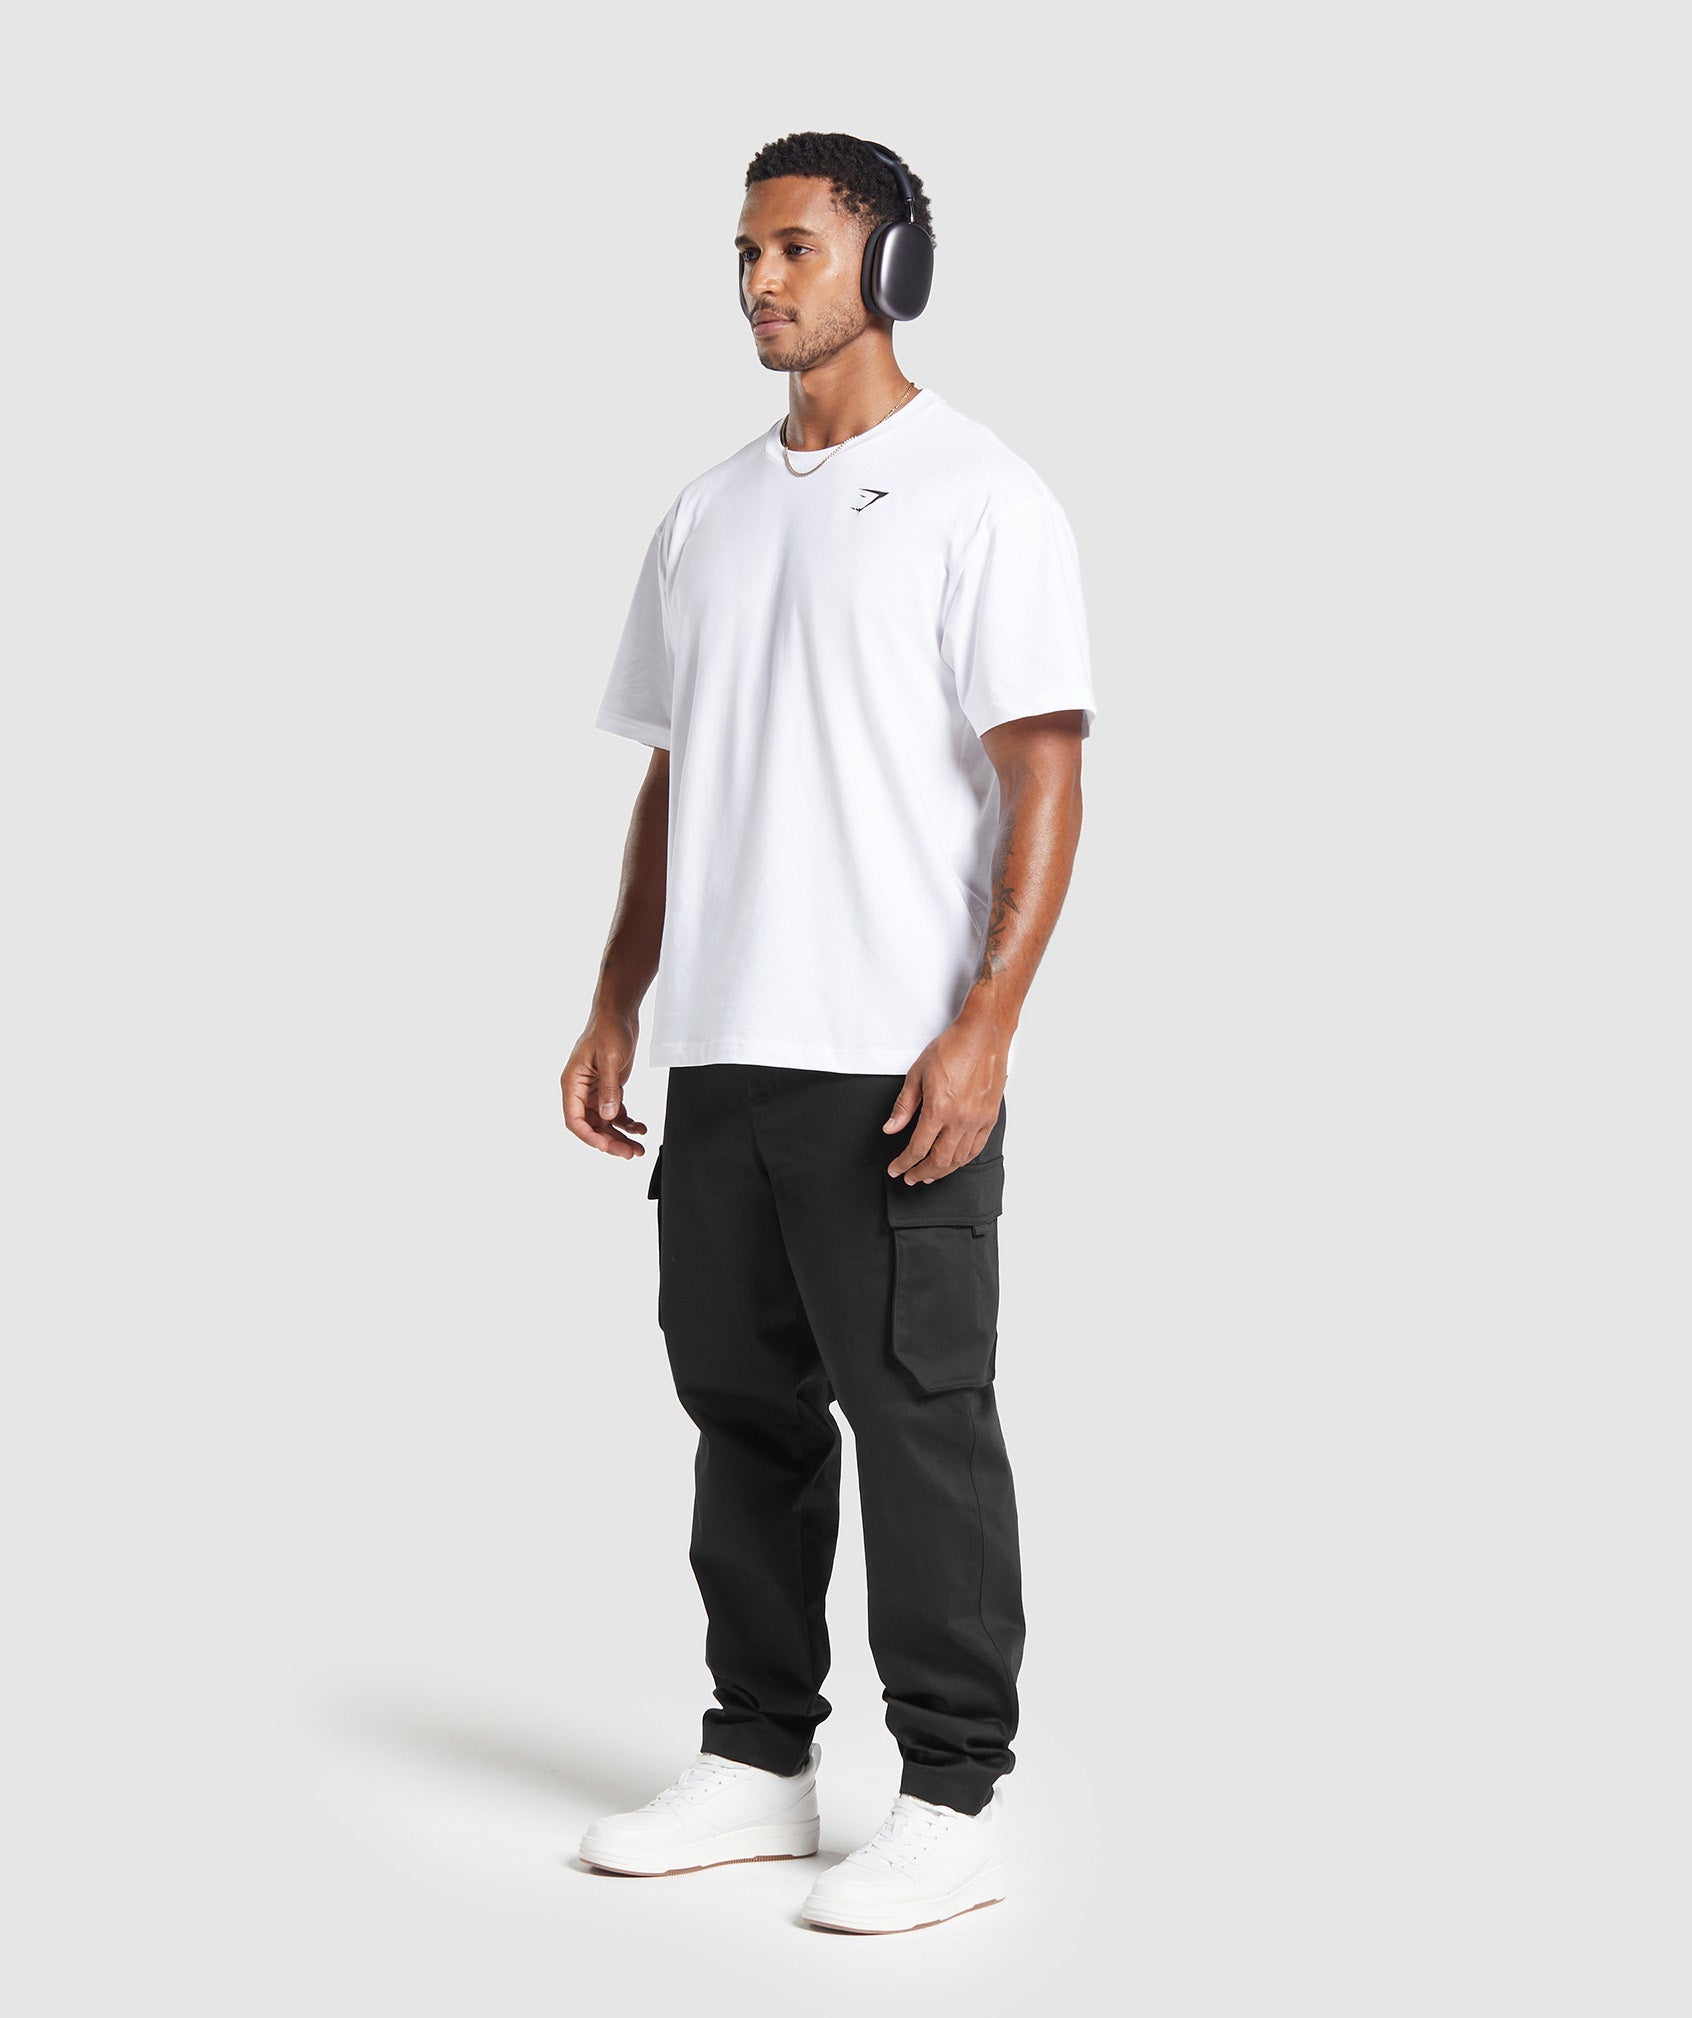 Rest Day Woven Cargo Pants in Black - view 4